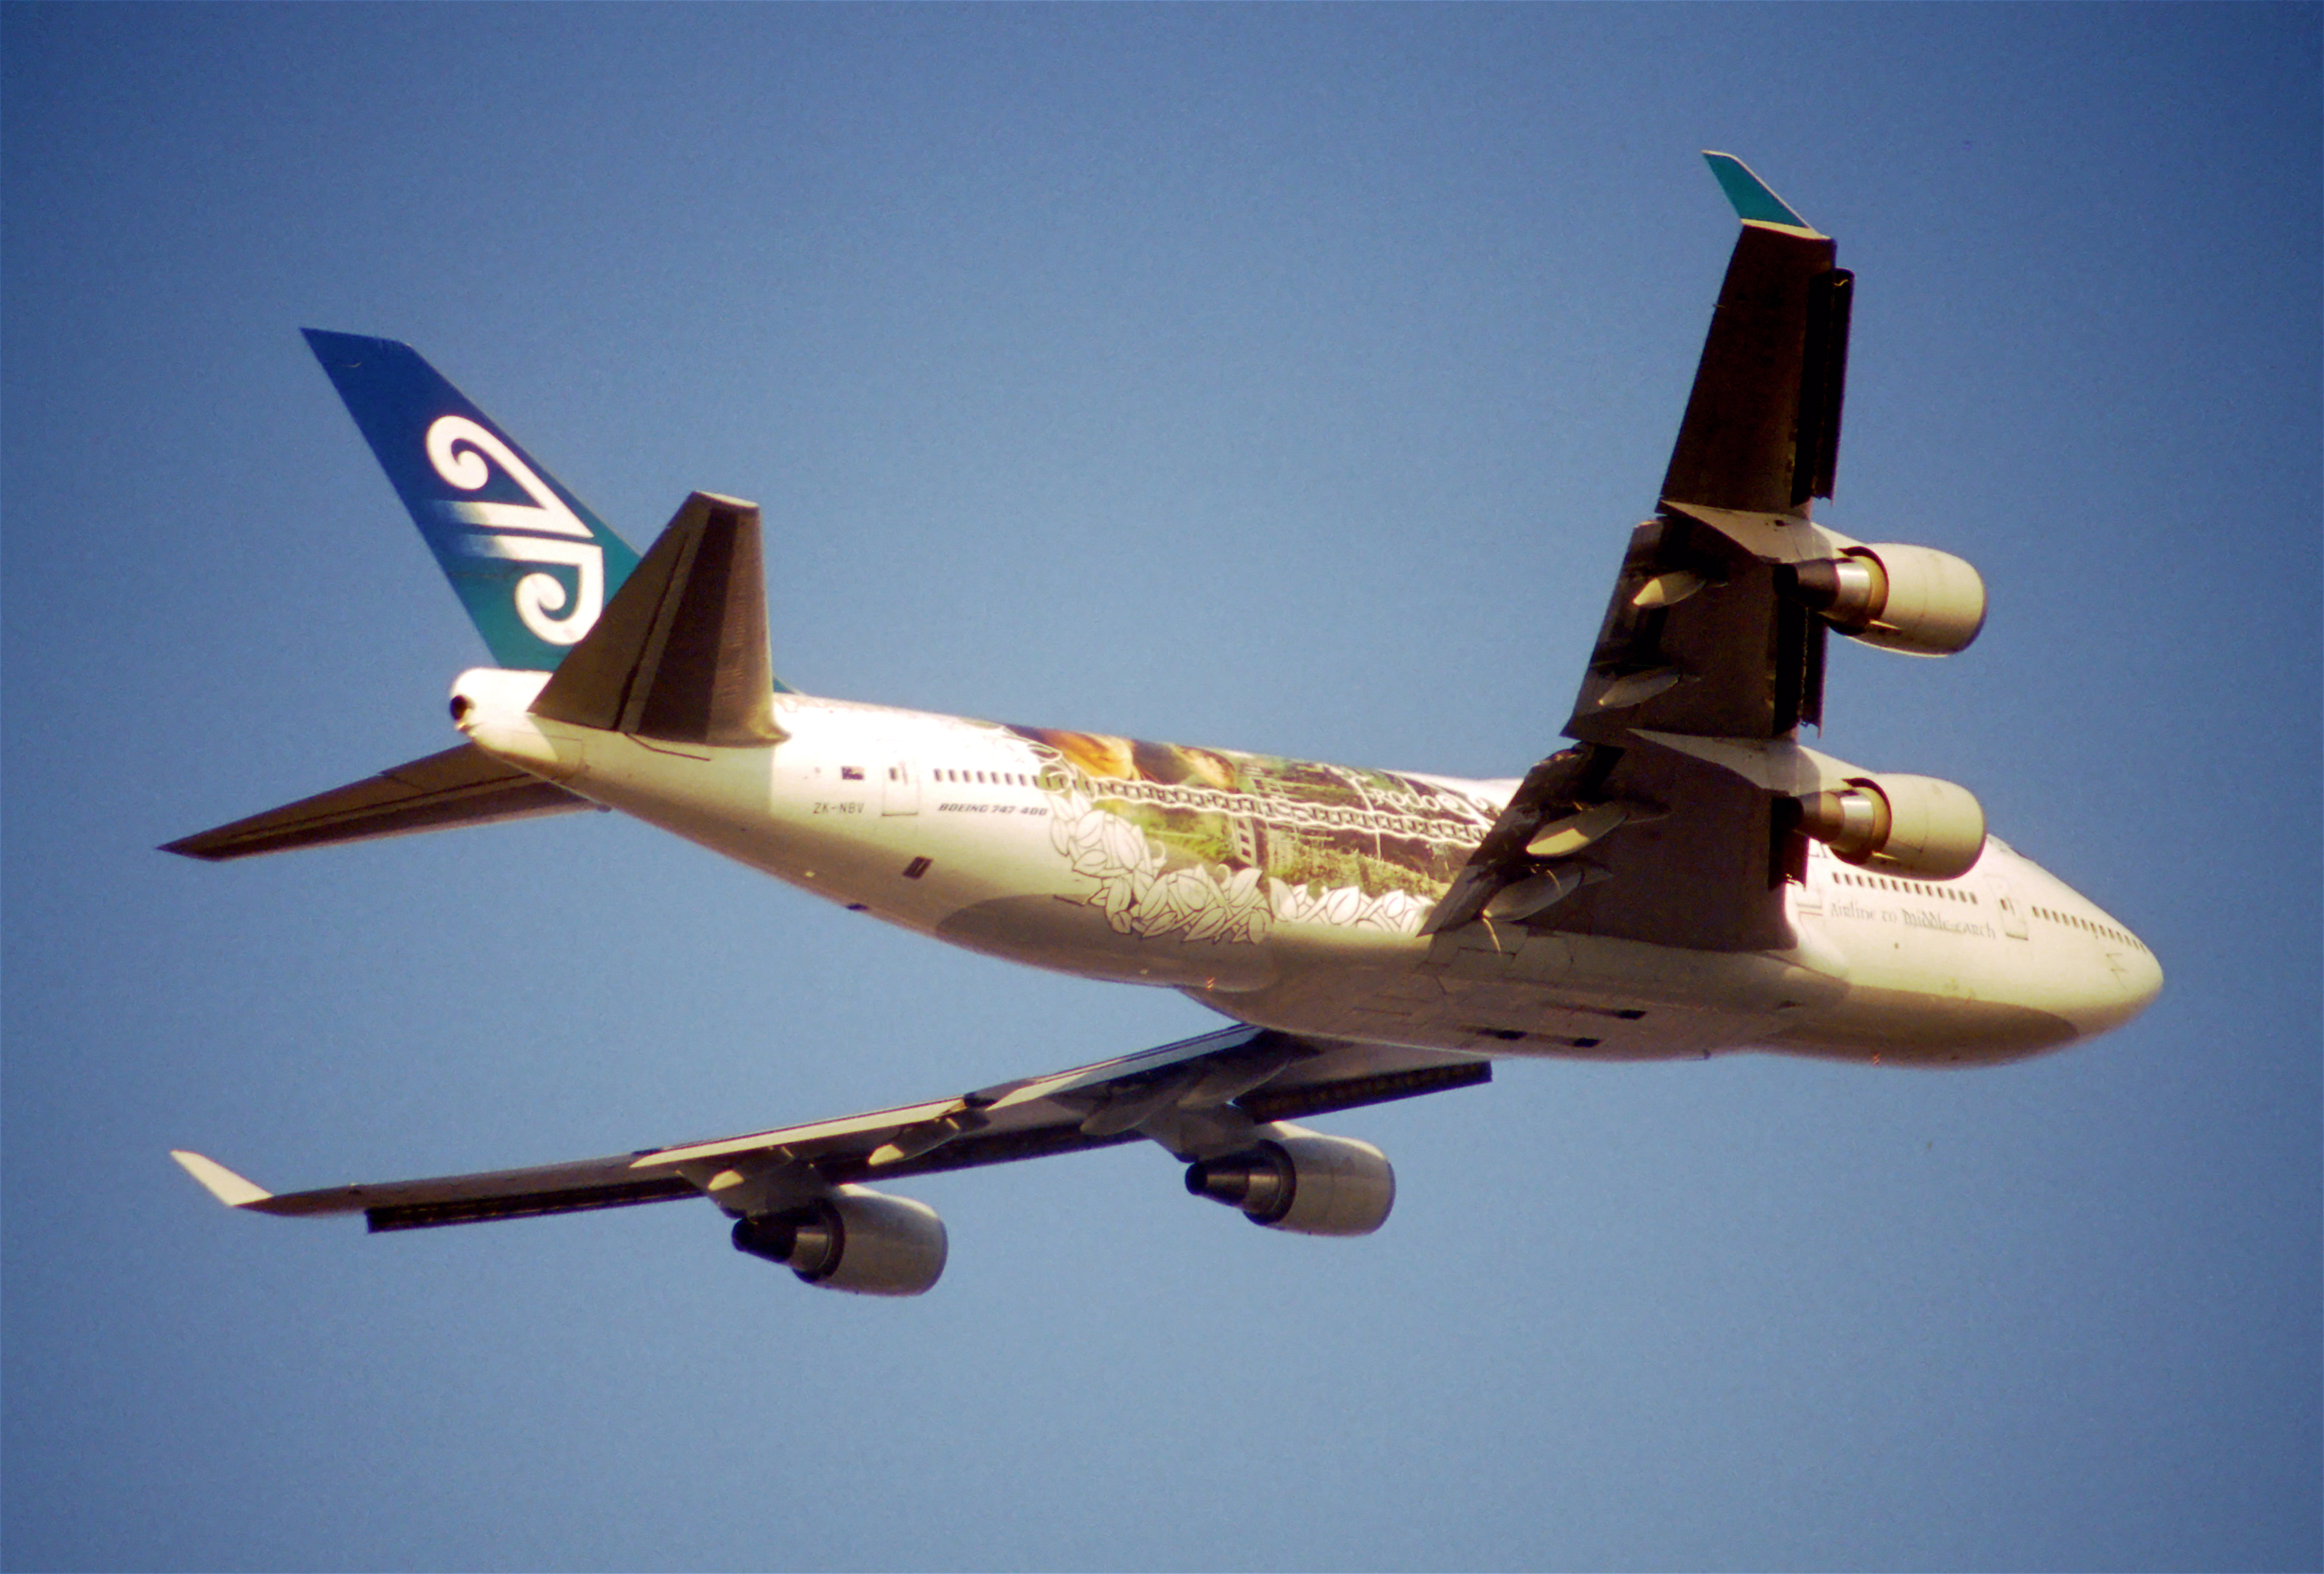 File:208ax - Air New Zealand Boeing 747-419, ZK-NBV@LHR,22.02.2003 